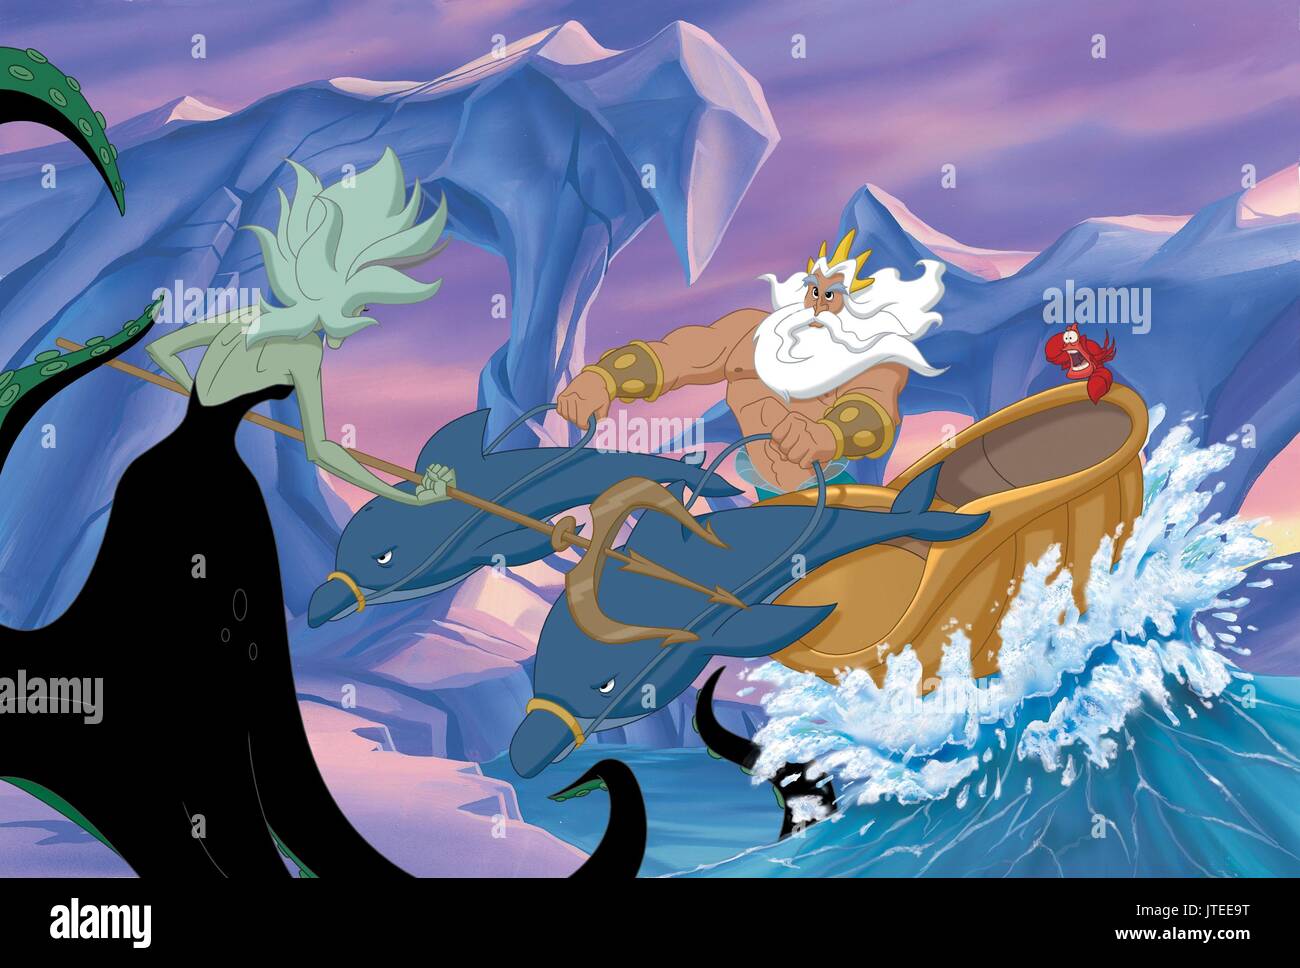 King Triton The Little Mermaid High Resolution Stock Photography And Images Alamy